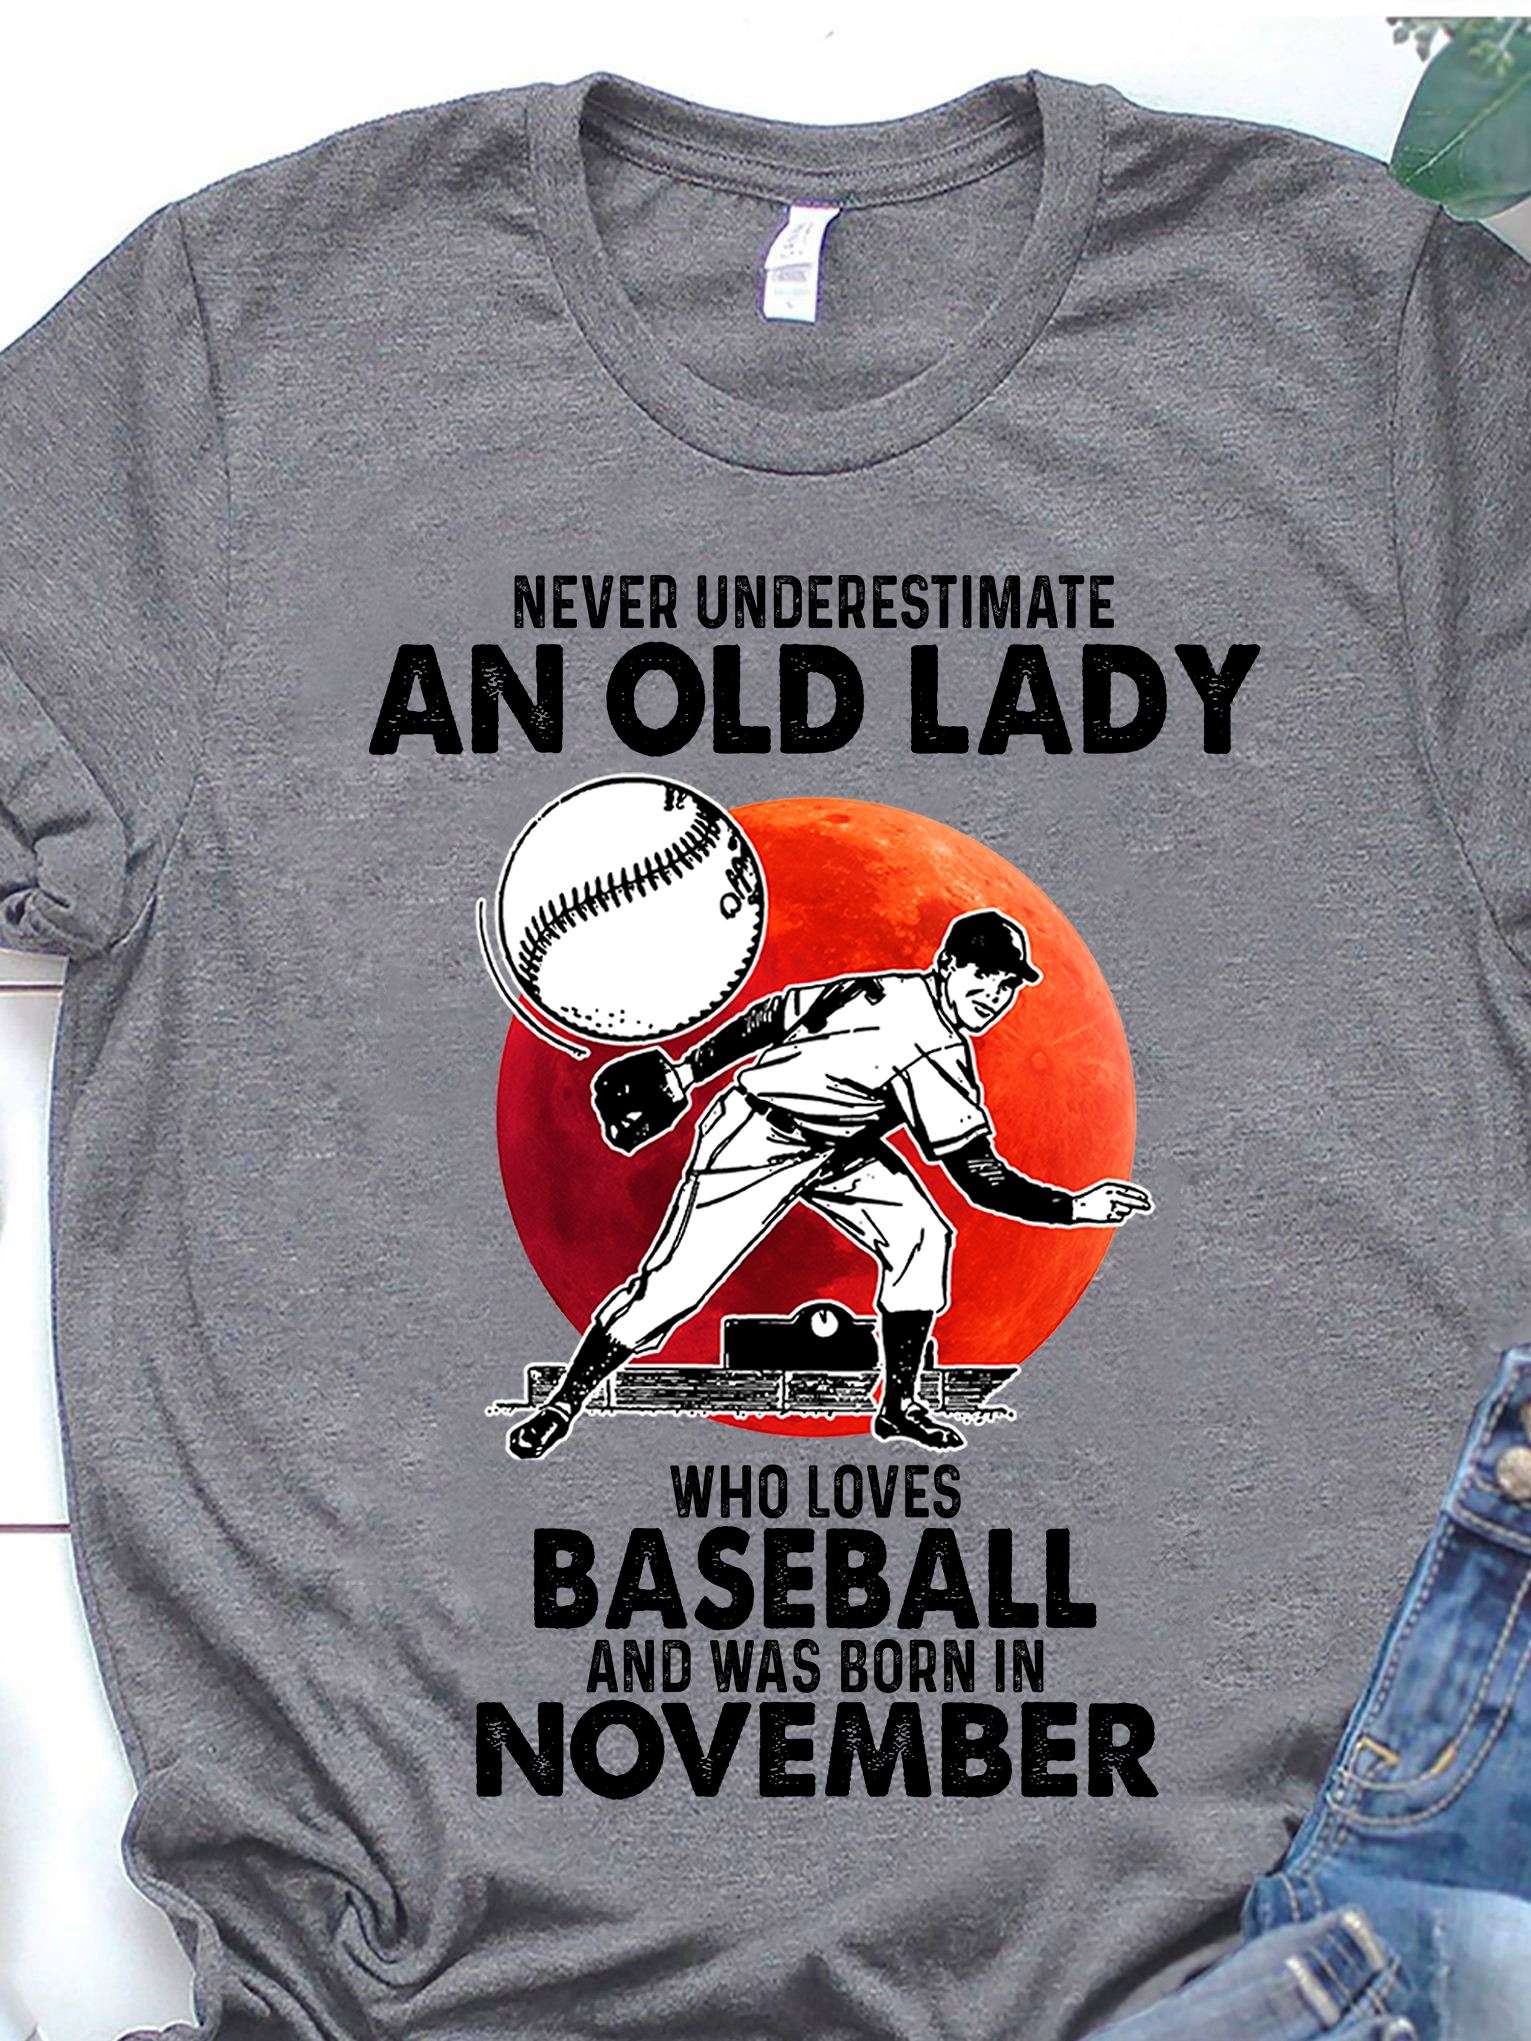 Never underestimate an old lady who loves baseball and was born in November